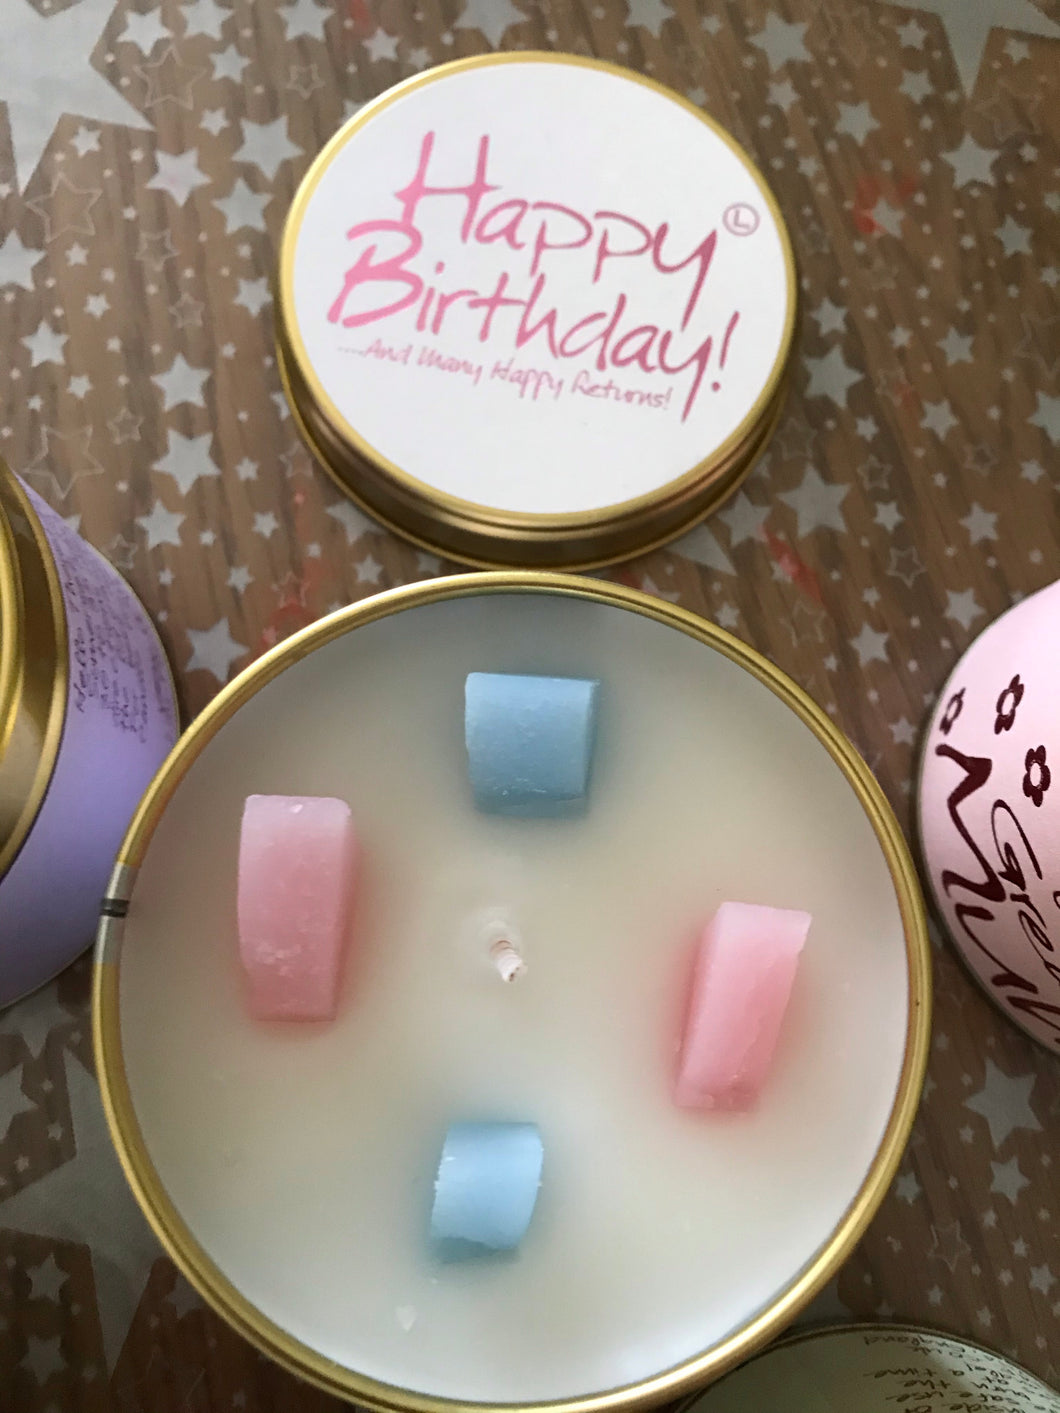 Happy Birthday candle tin by Lily Flame